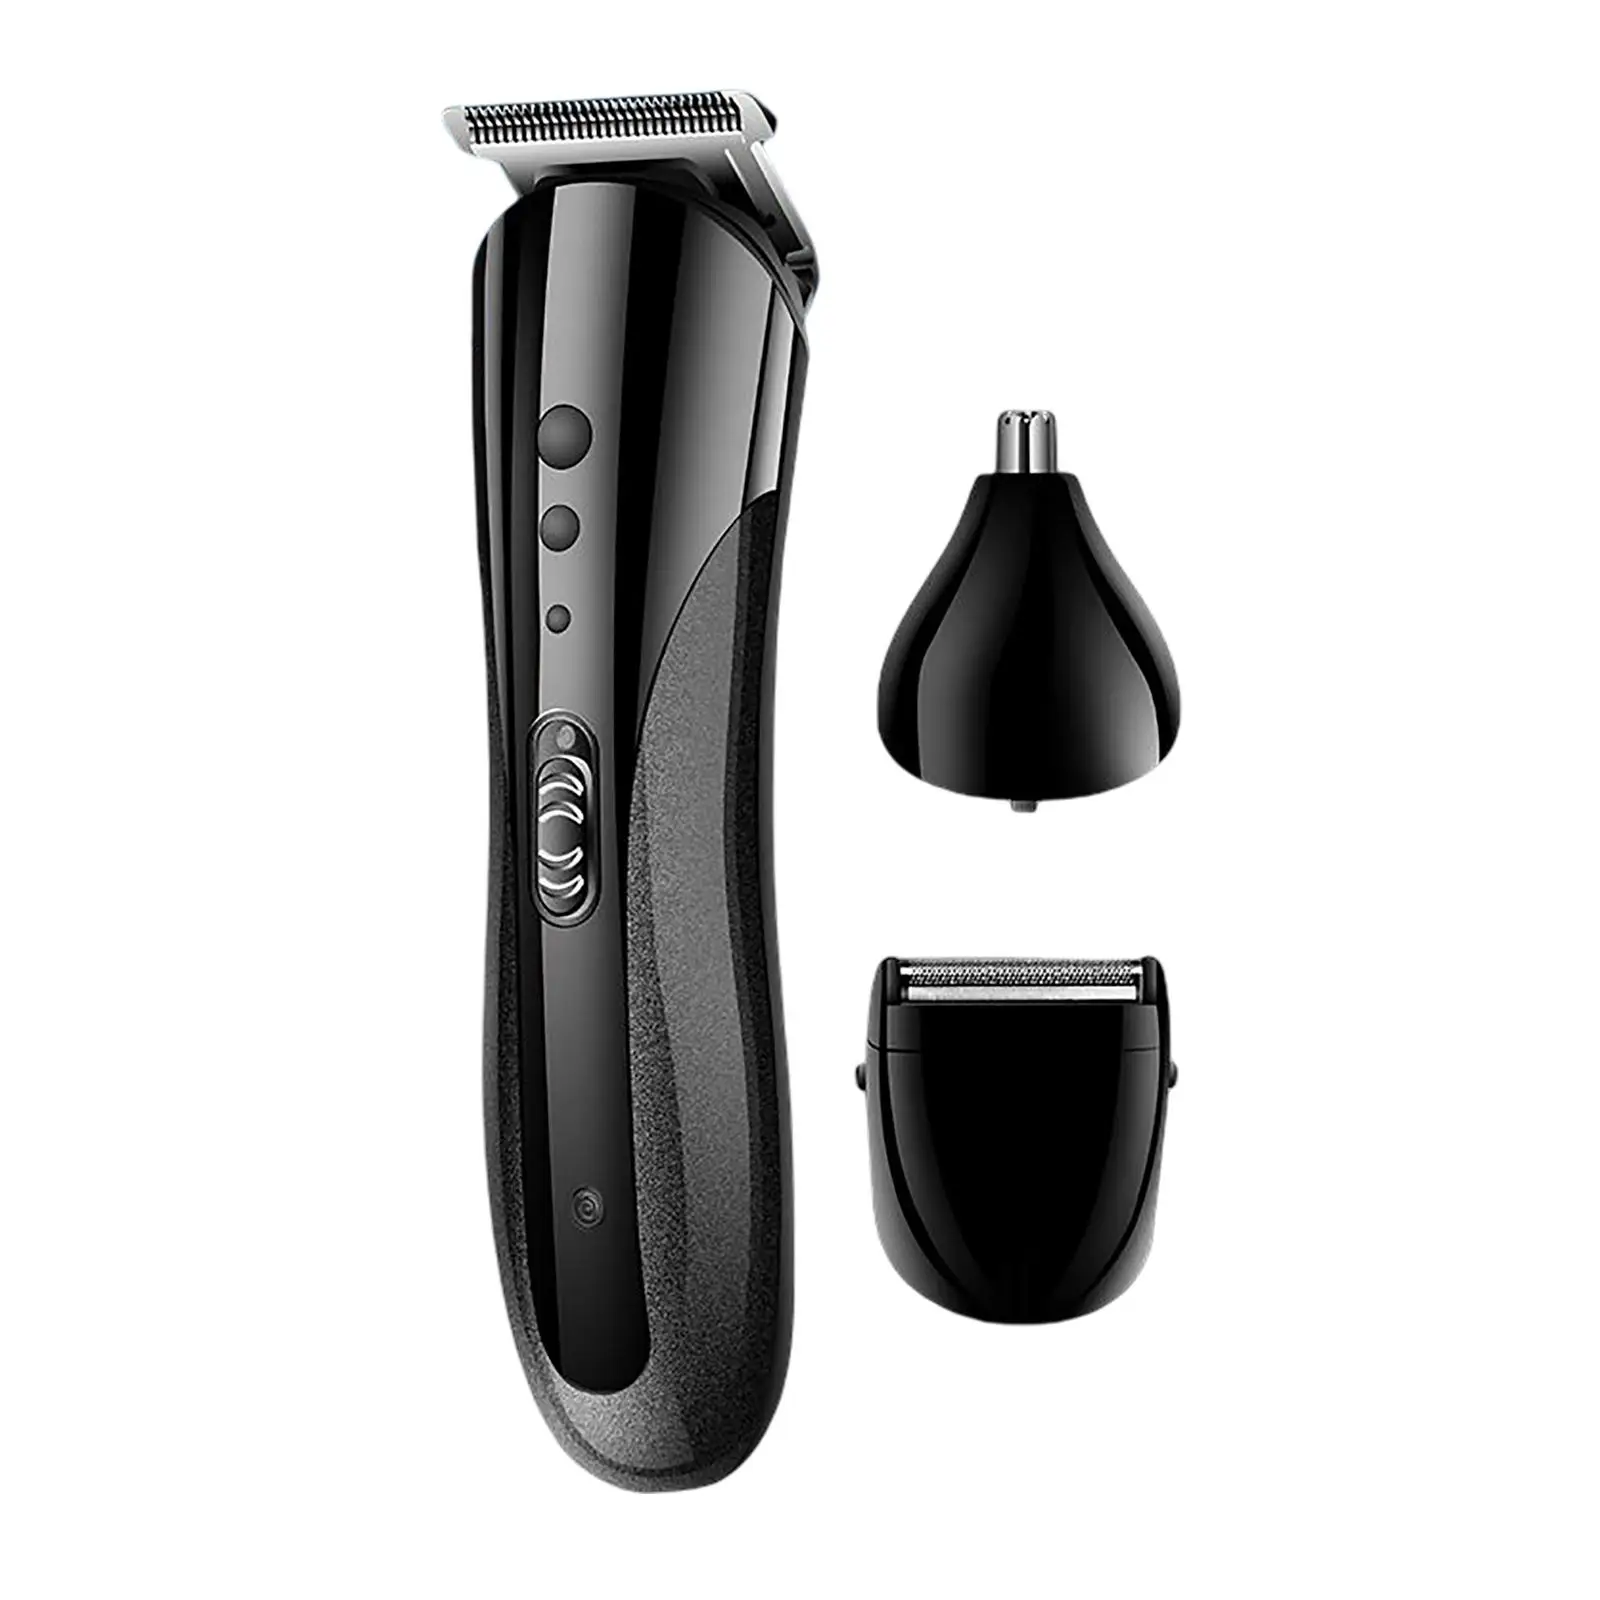 Hair Clippers Trimmer USB Charging Carbon Steel Hair Cutting Hair Shaver Grooming Barber Tool Men Gifts EU